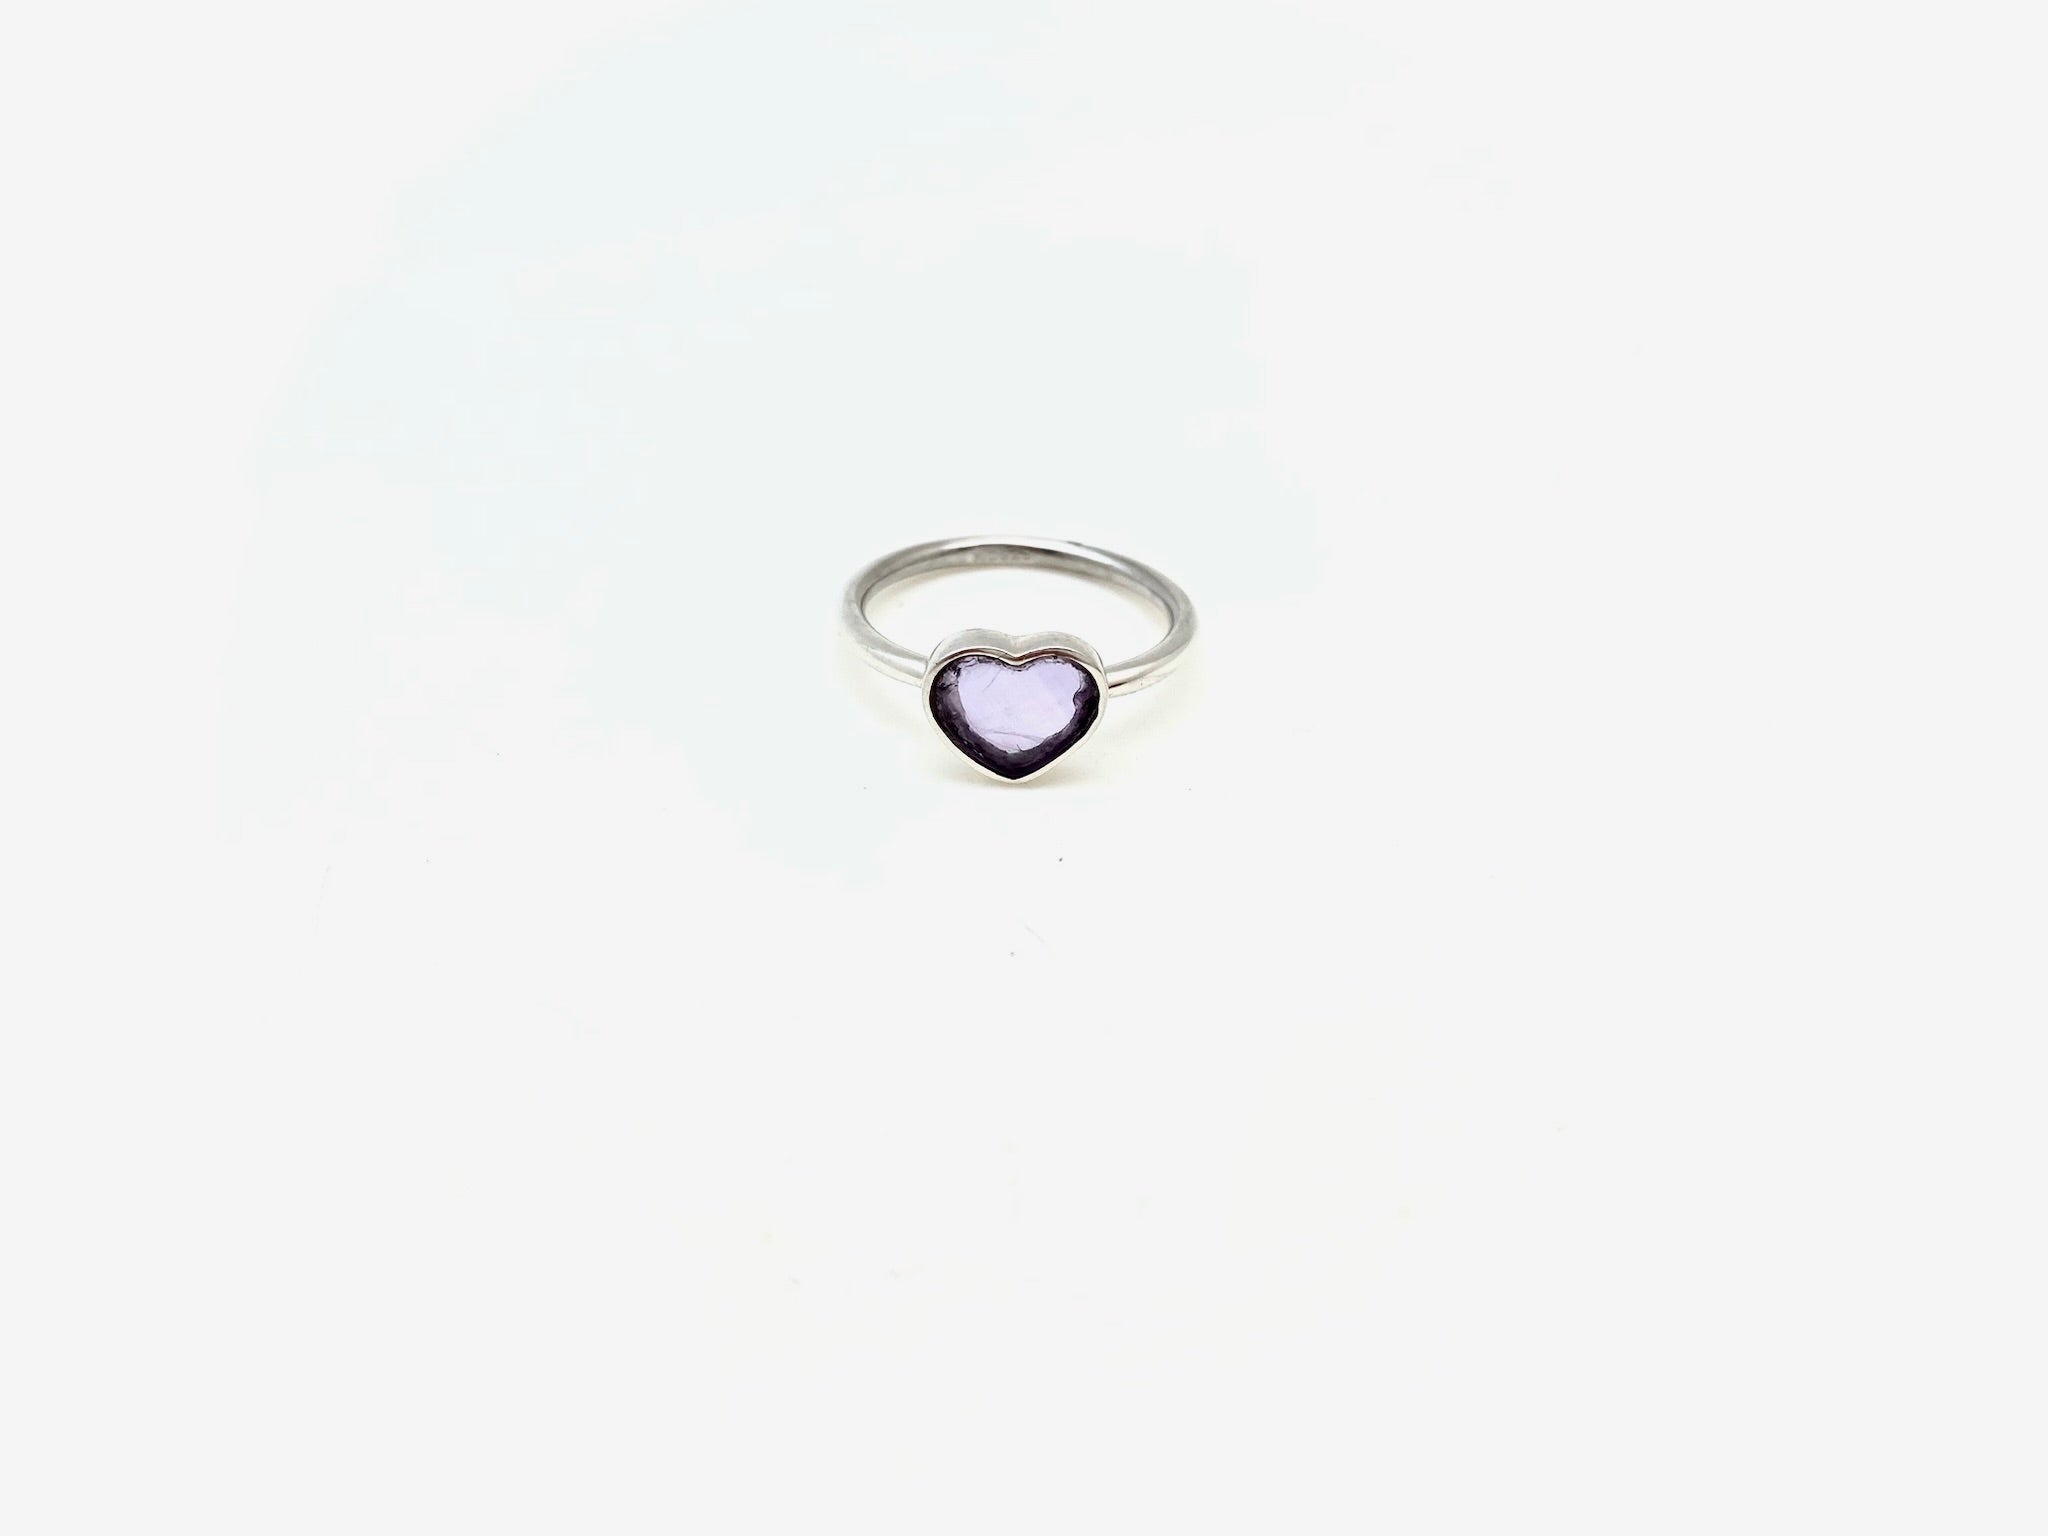 Summer Camp Amethyst Heart Ring - Stone Cooper